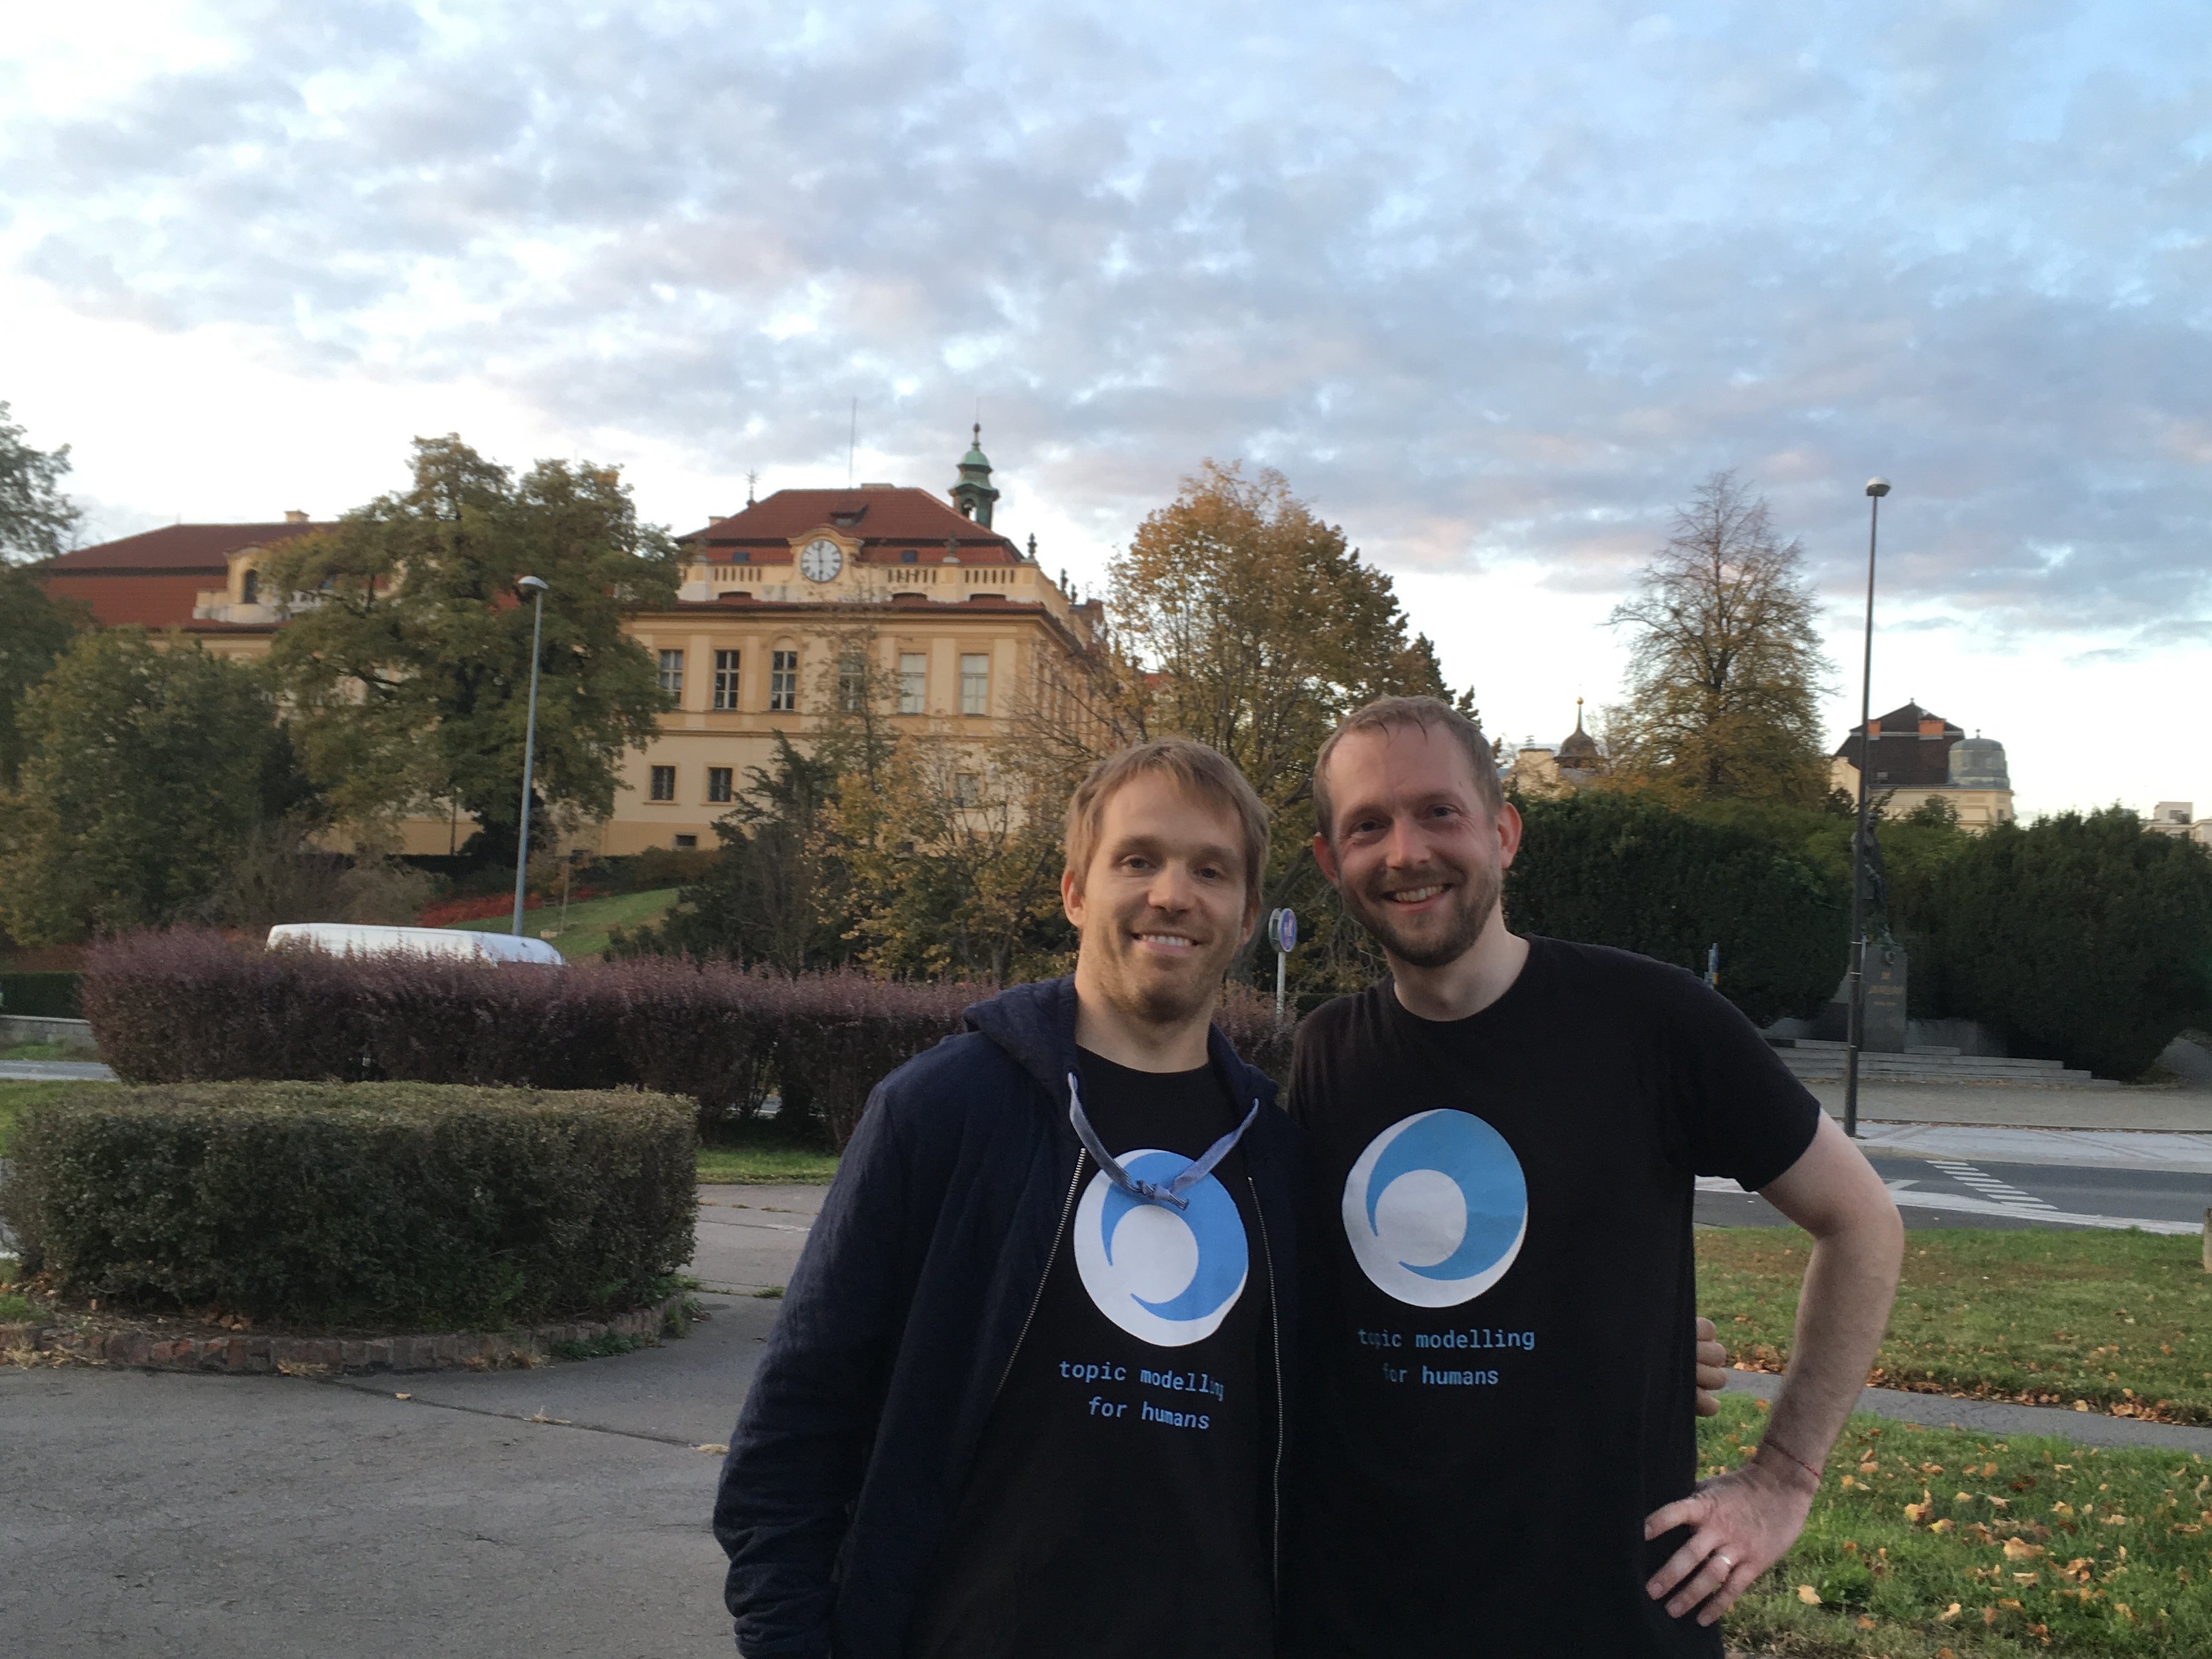 Misha (left) and Radim (right) got together in Prague for some open source and badminton :)